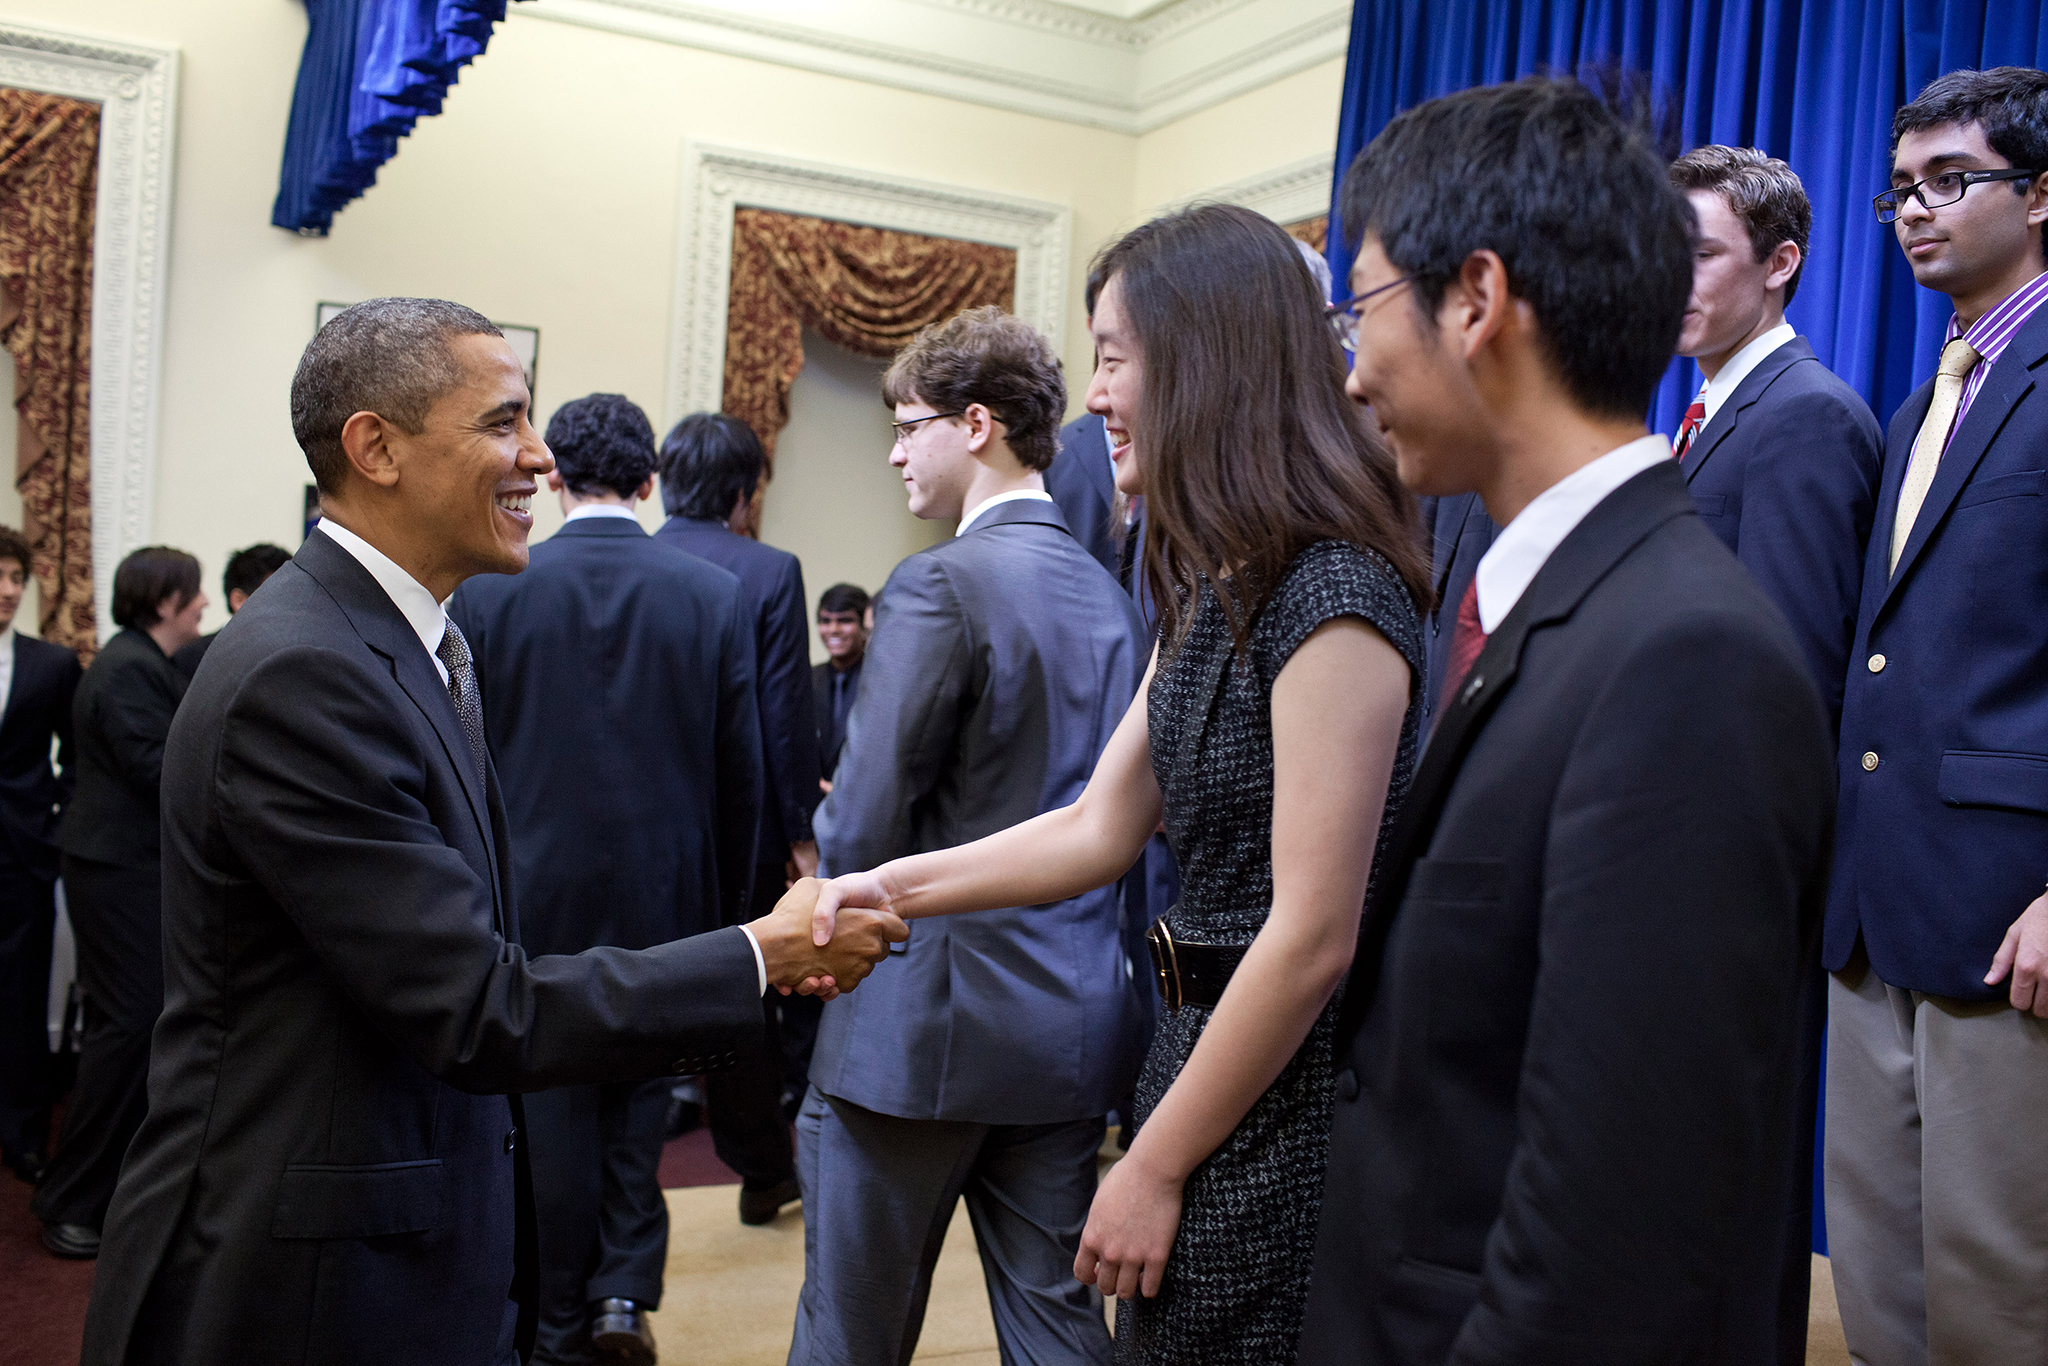 STS finalist Amy Chyao meets President Obama